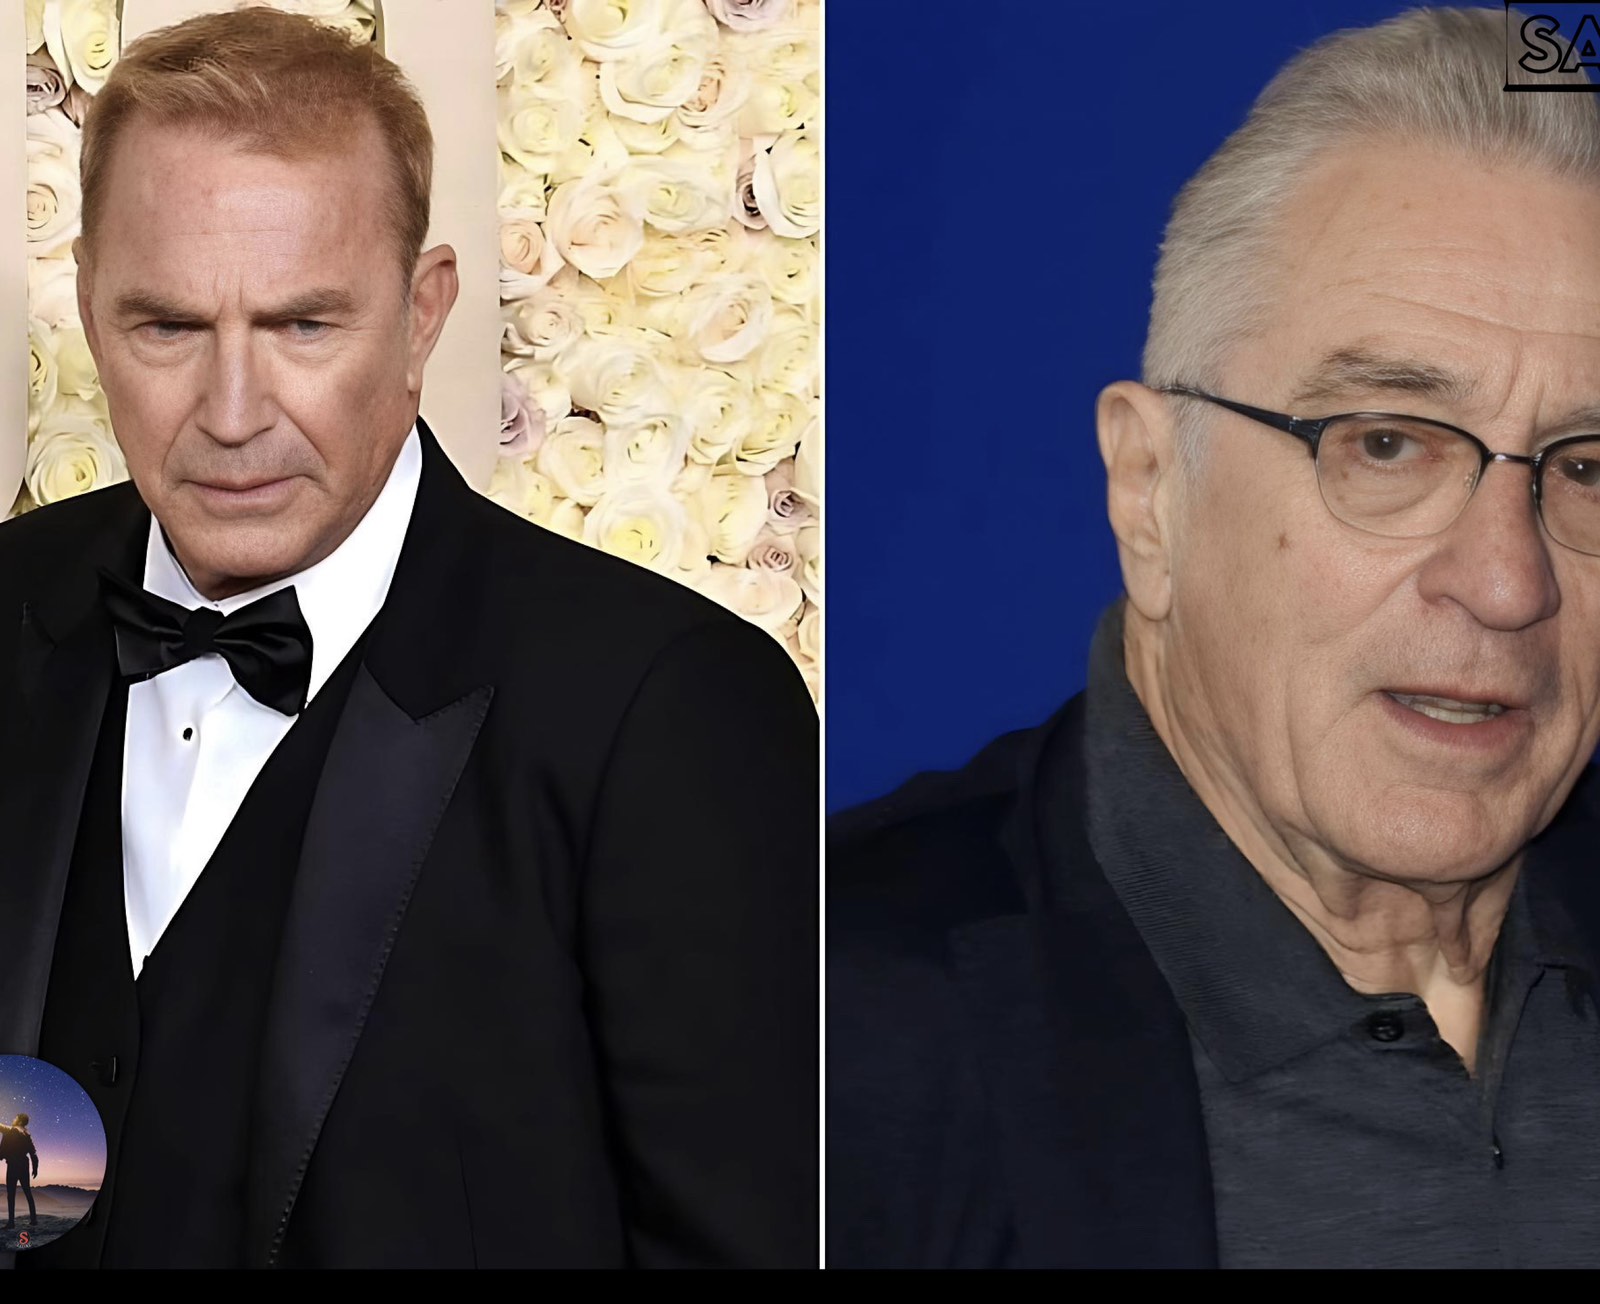 Kevin Costner’s Publicist Denies Reports of $100 Million Movie Deal Rejection